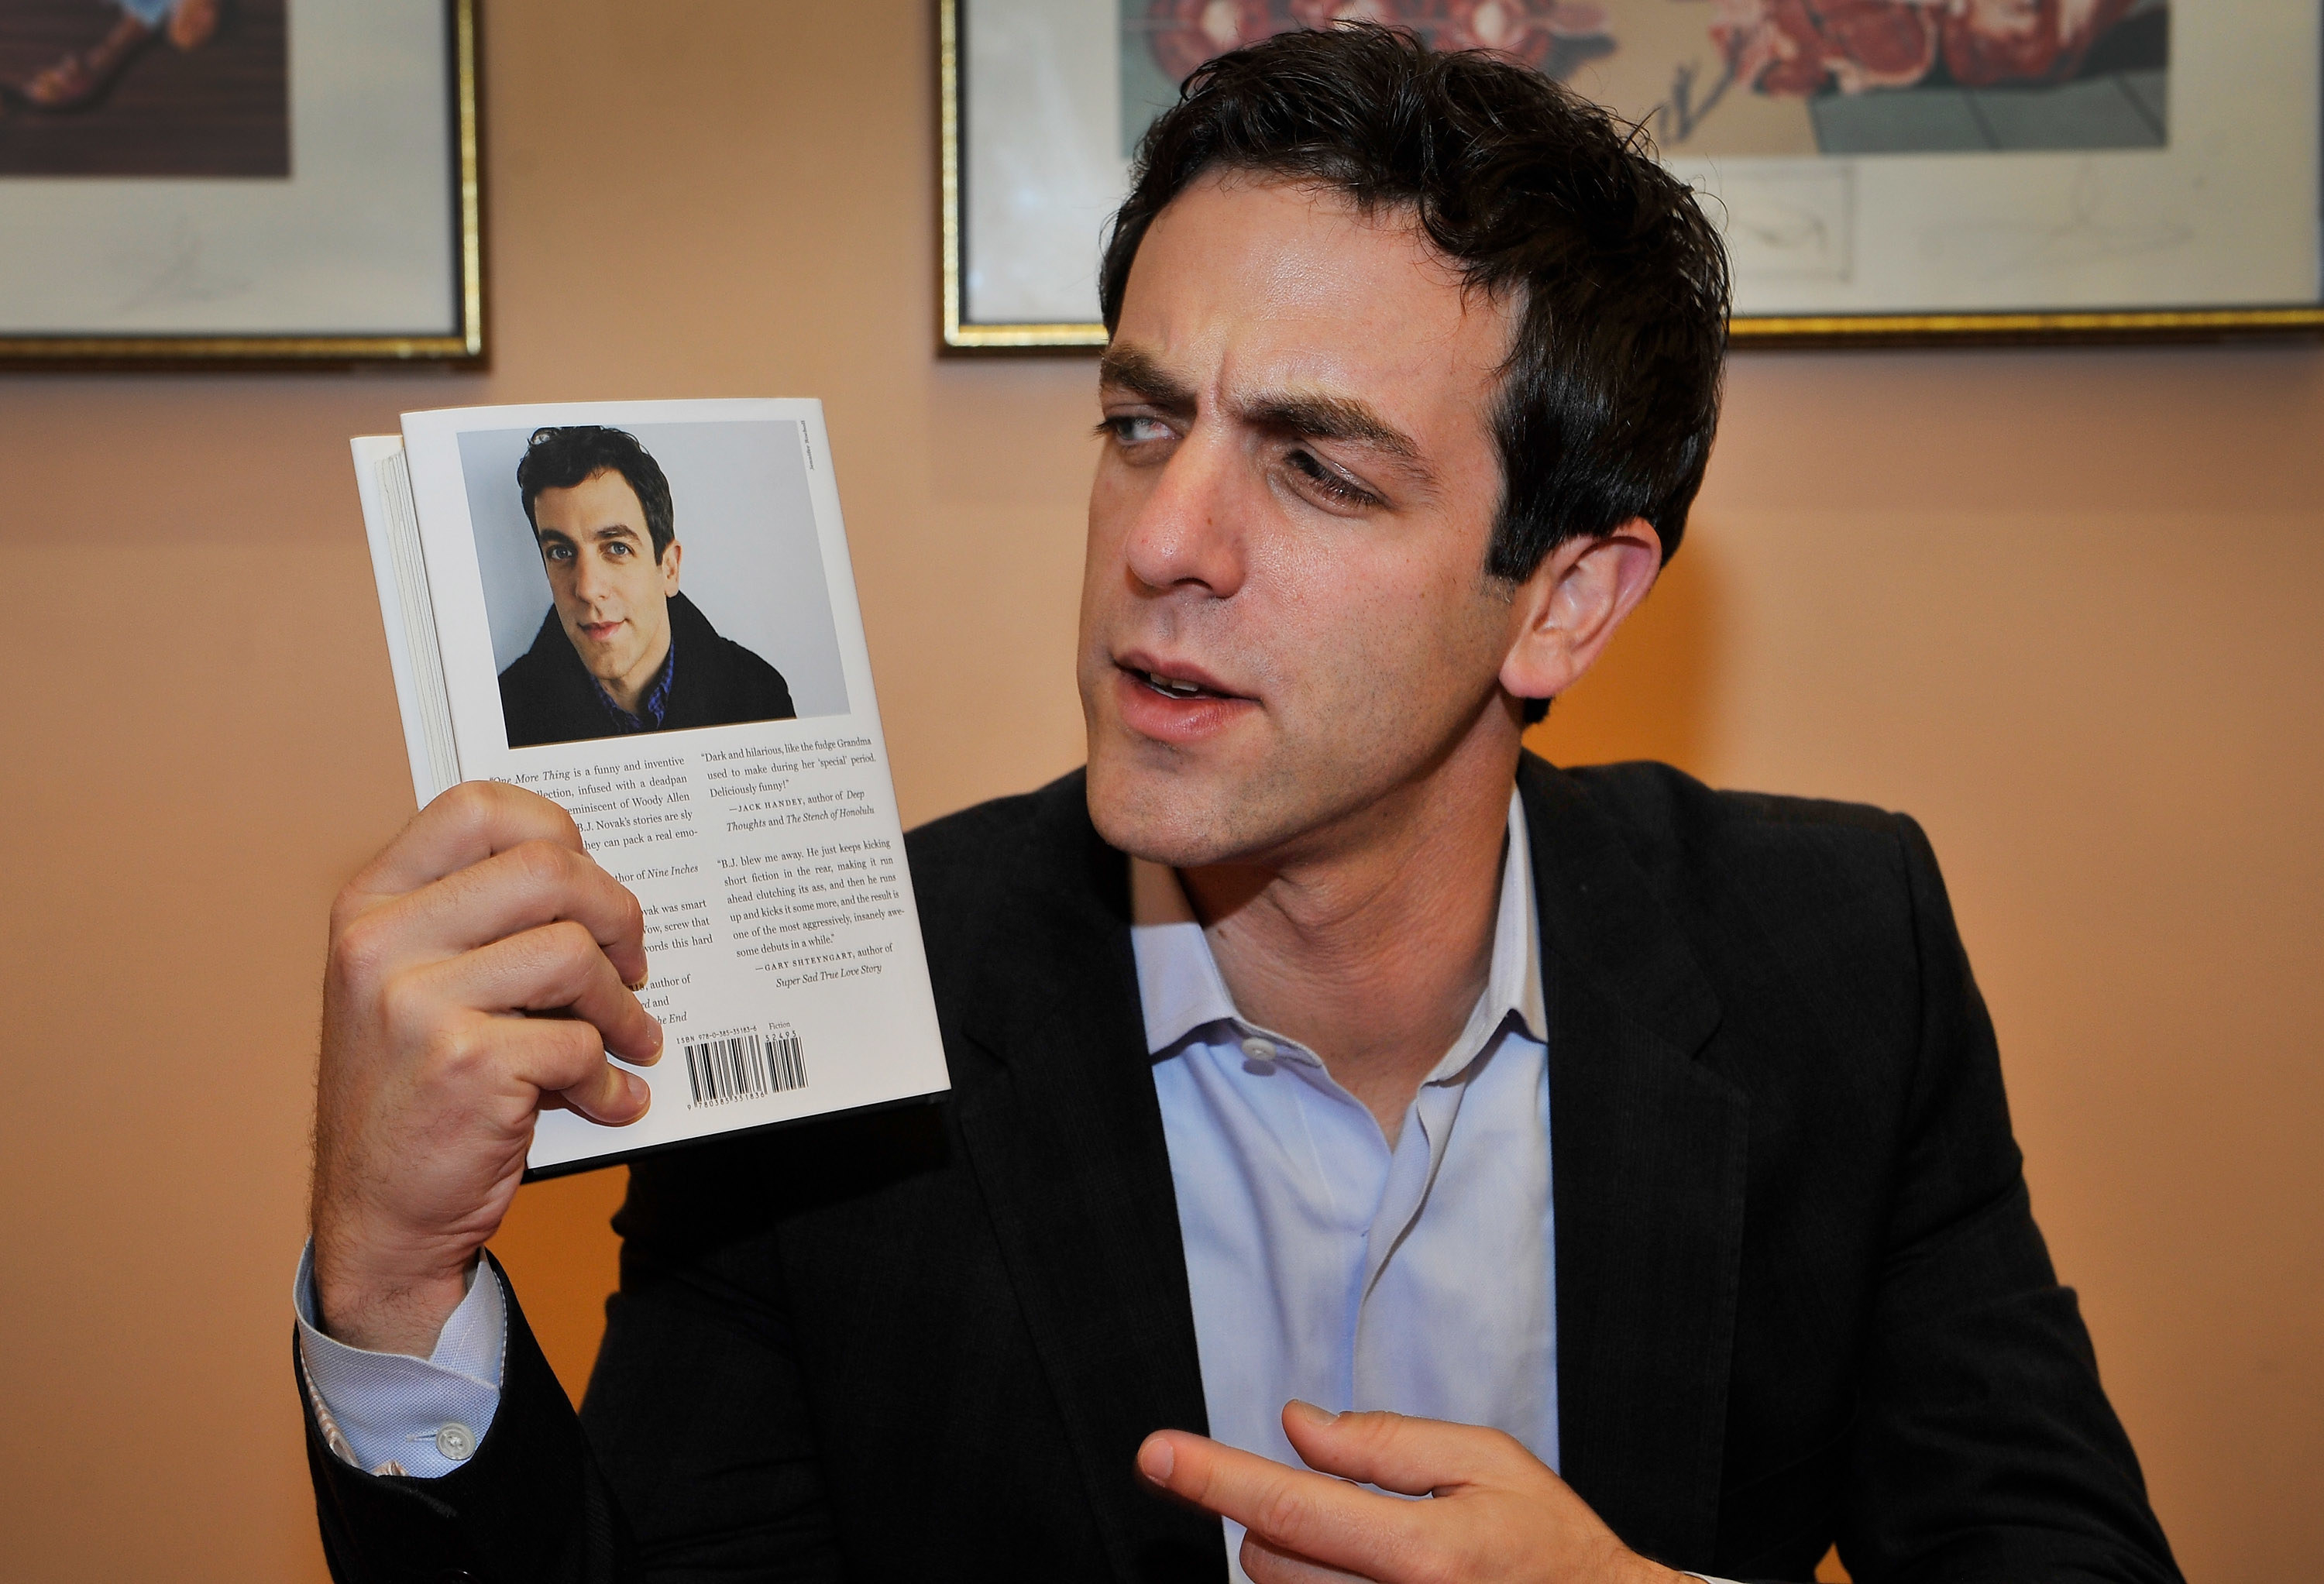 B.J. Novak holding his book &quot;One More Thing&quot; at a book festival